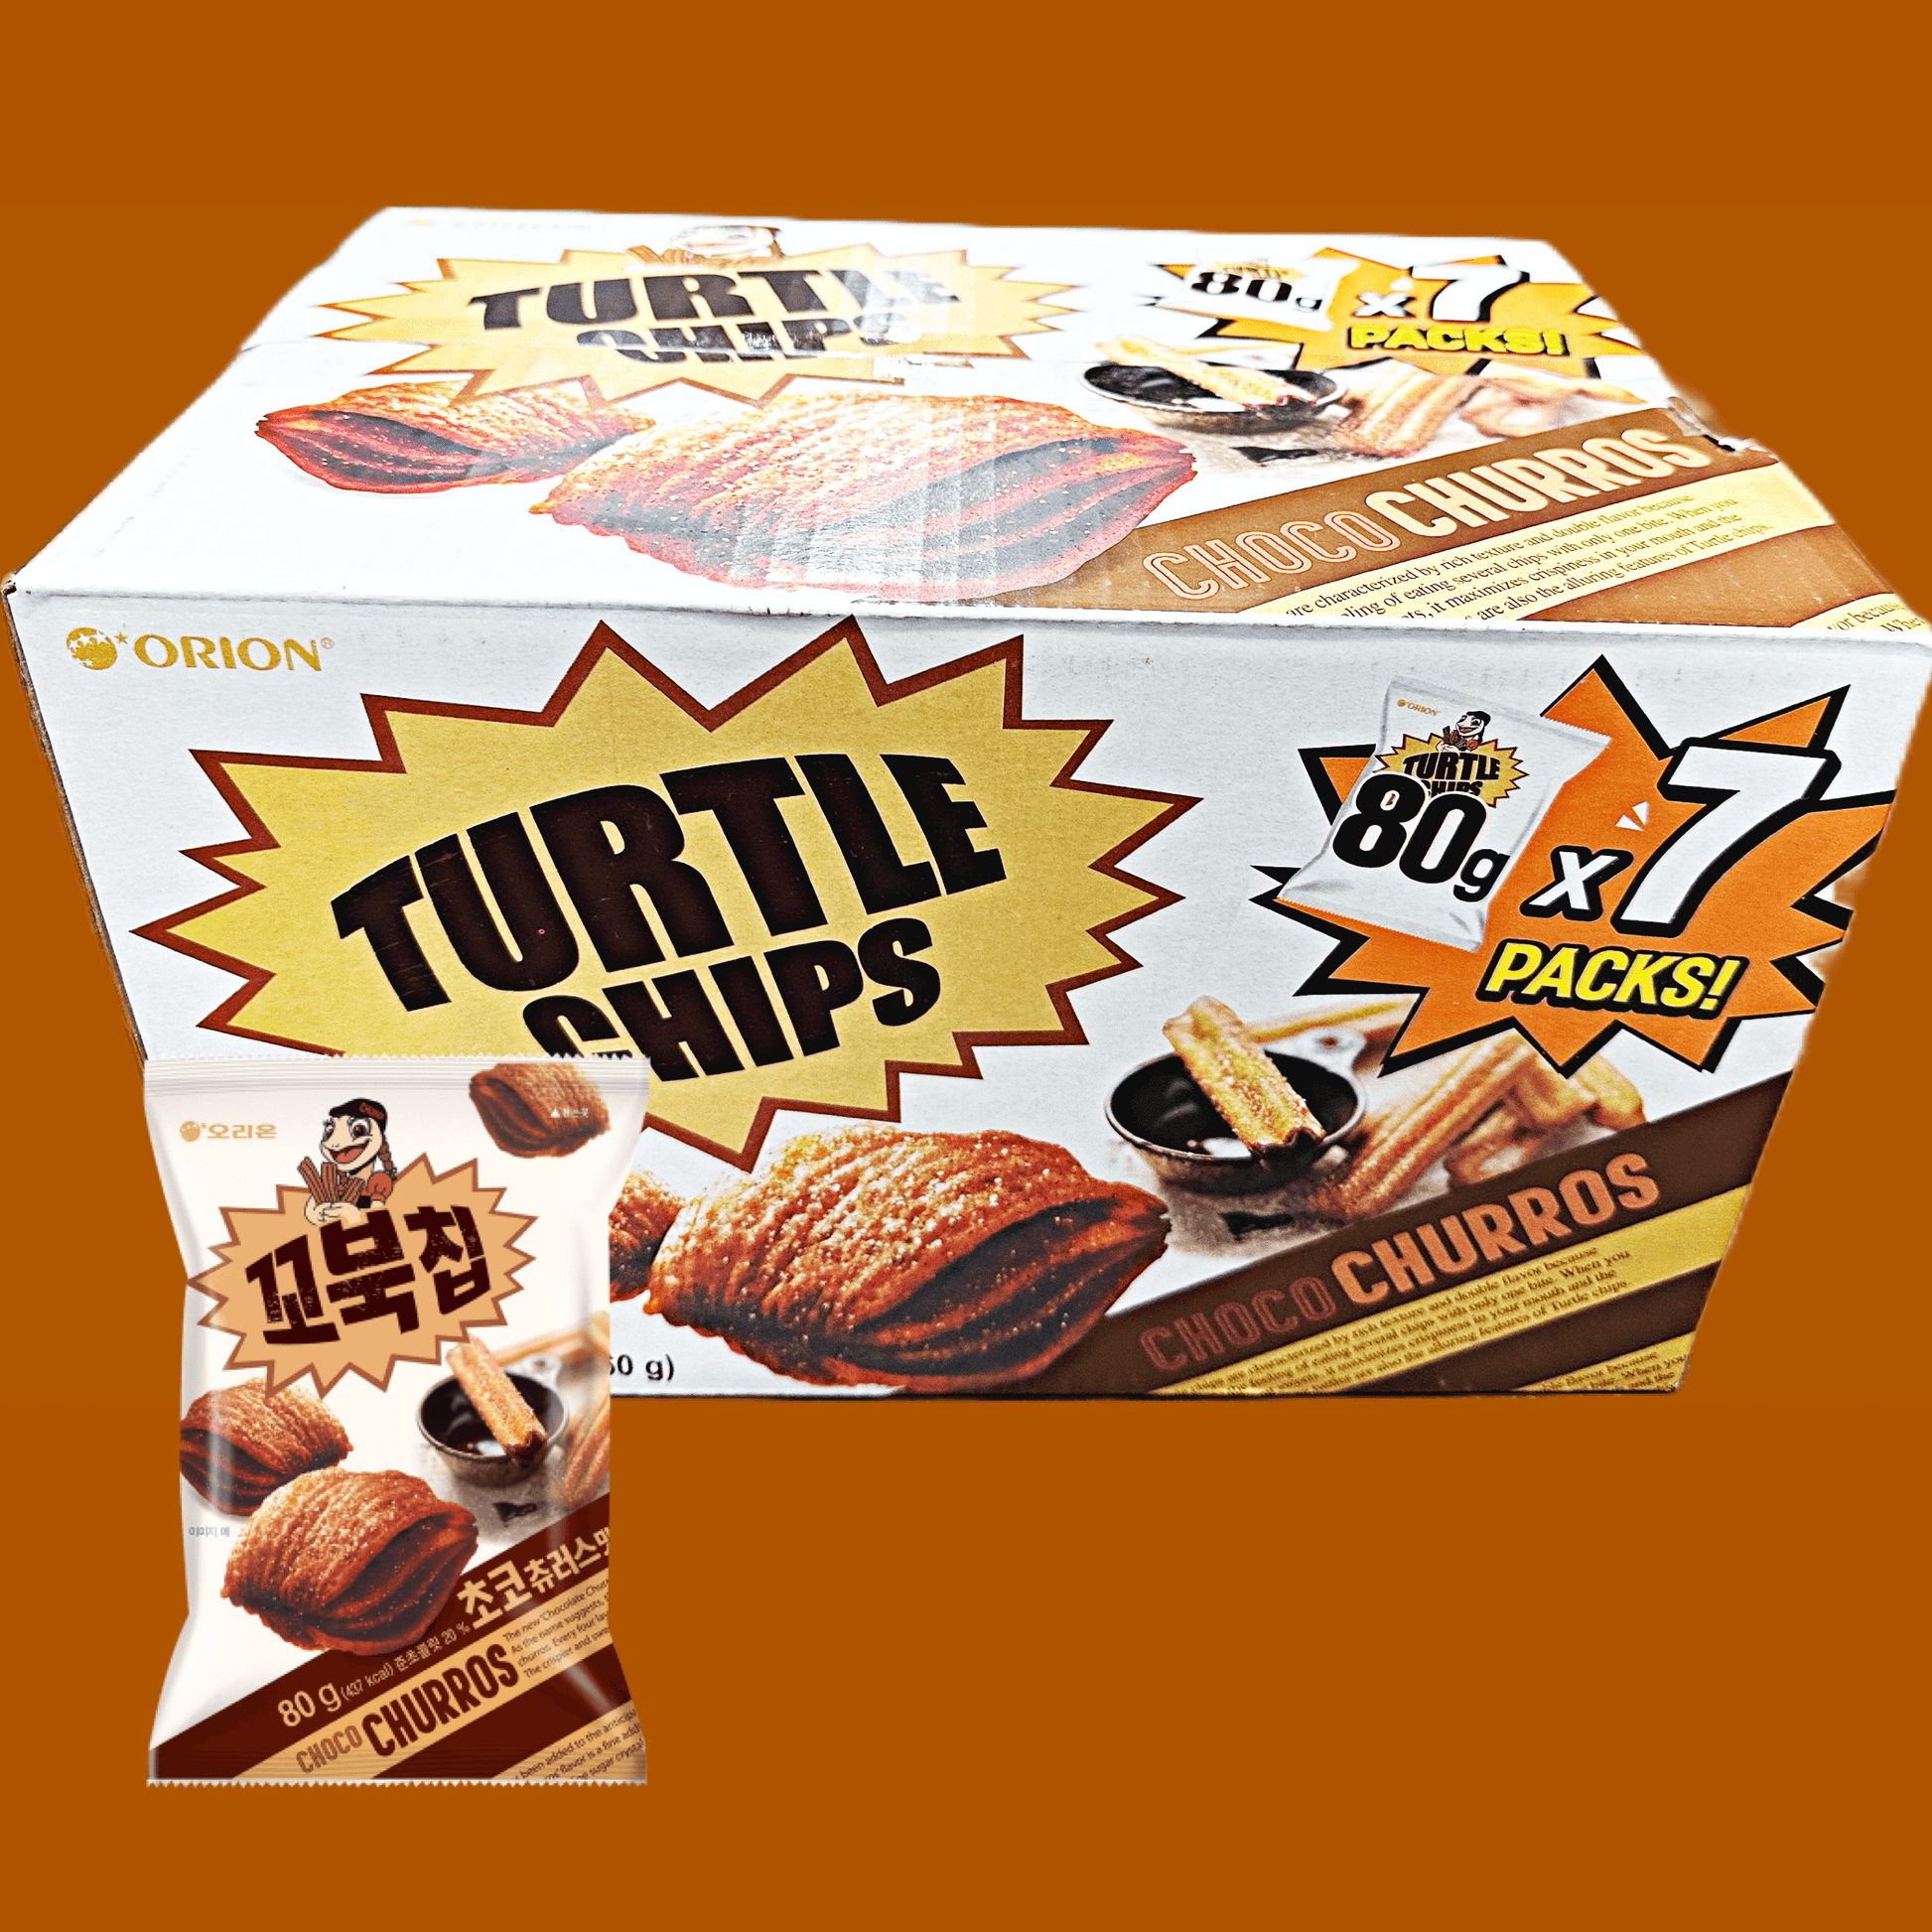 Orion Turtle Chips Churros 7x80g - The Snacks Box - Asian Snacks Store - The Snacks Box - Korean Snack - Japanese Snack